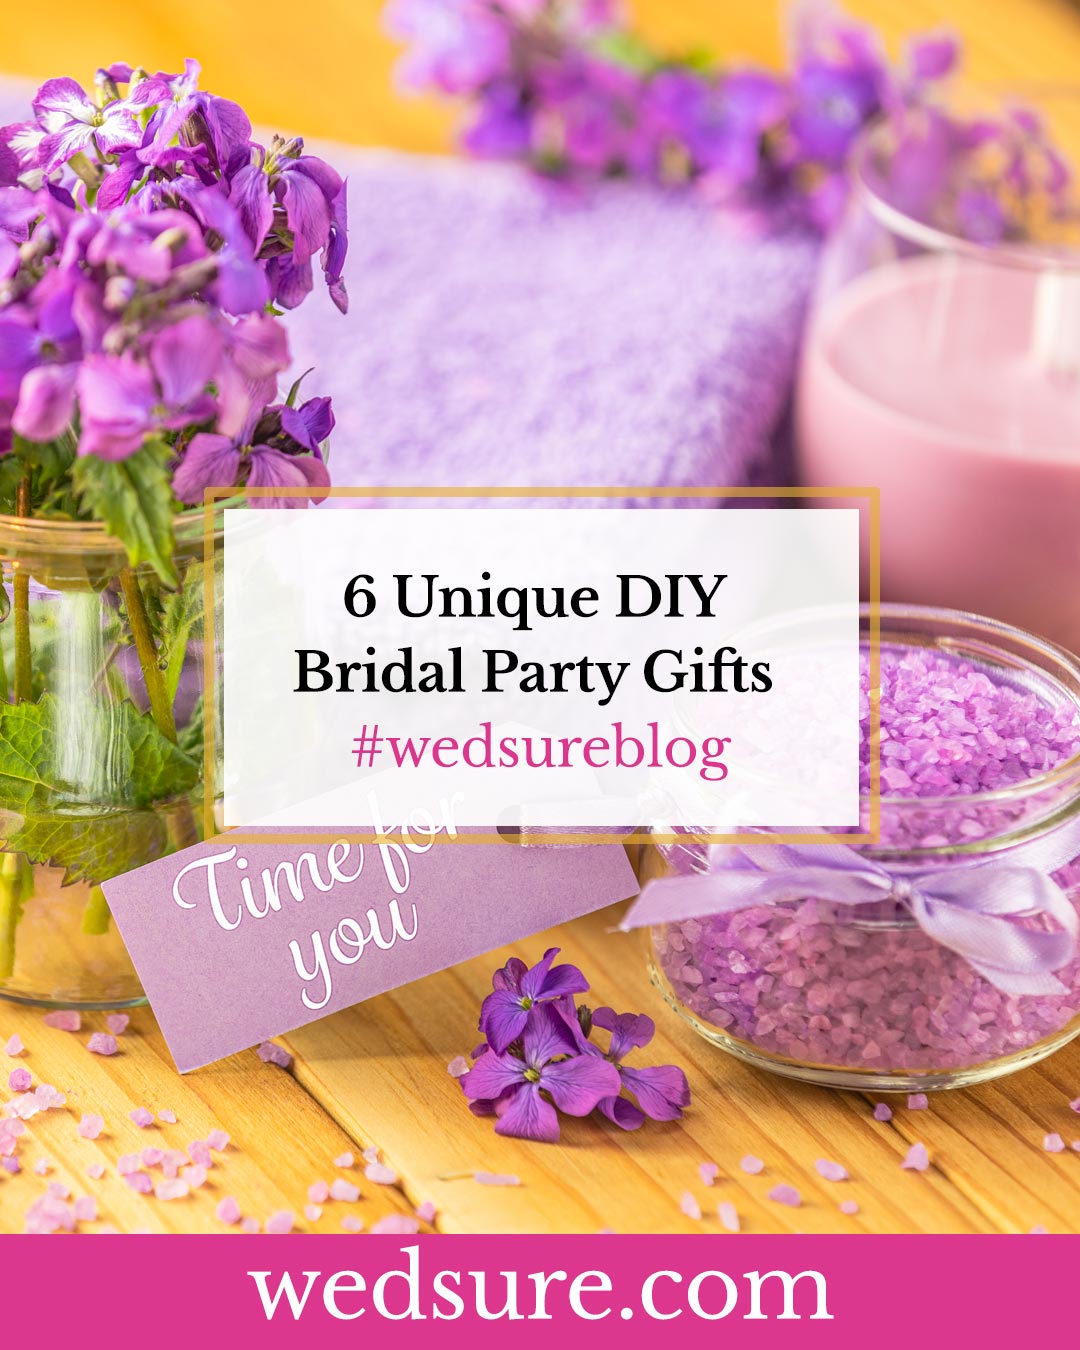 6 Unique DIY Bridesmaids Gifts your Bridal Party will Love